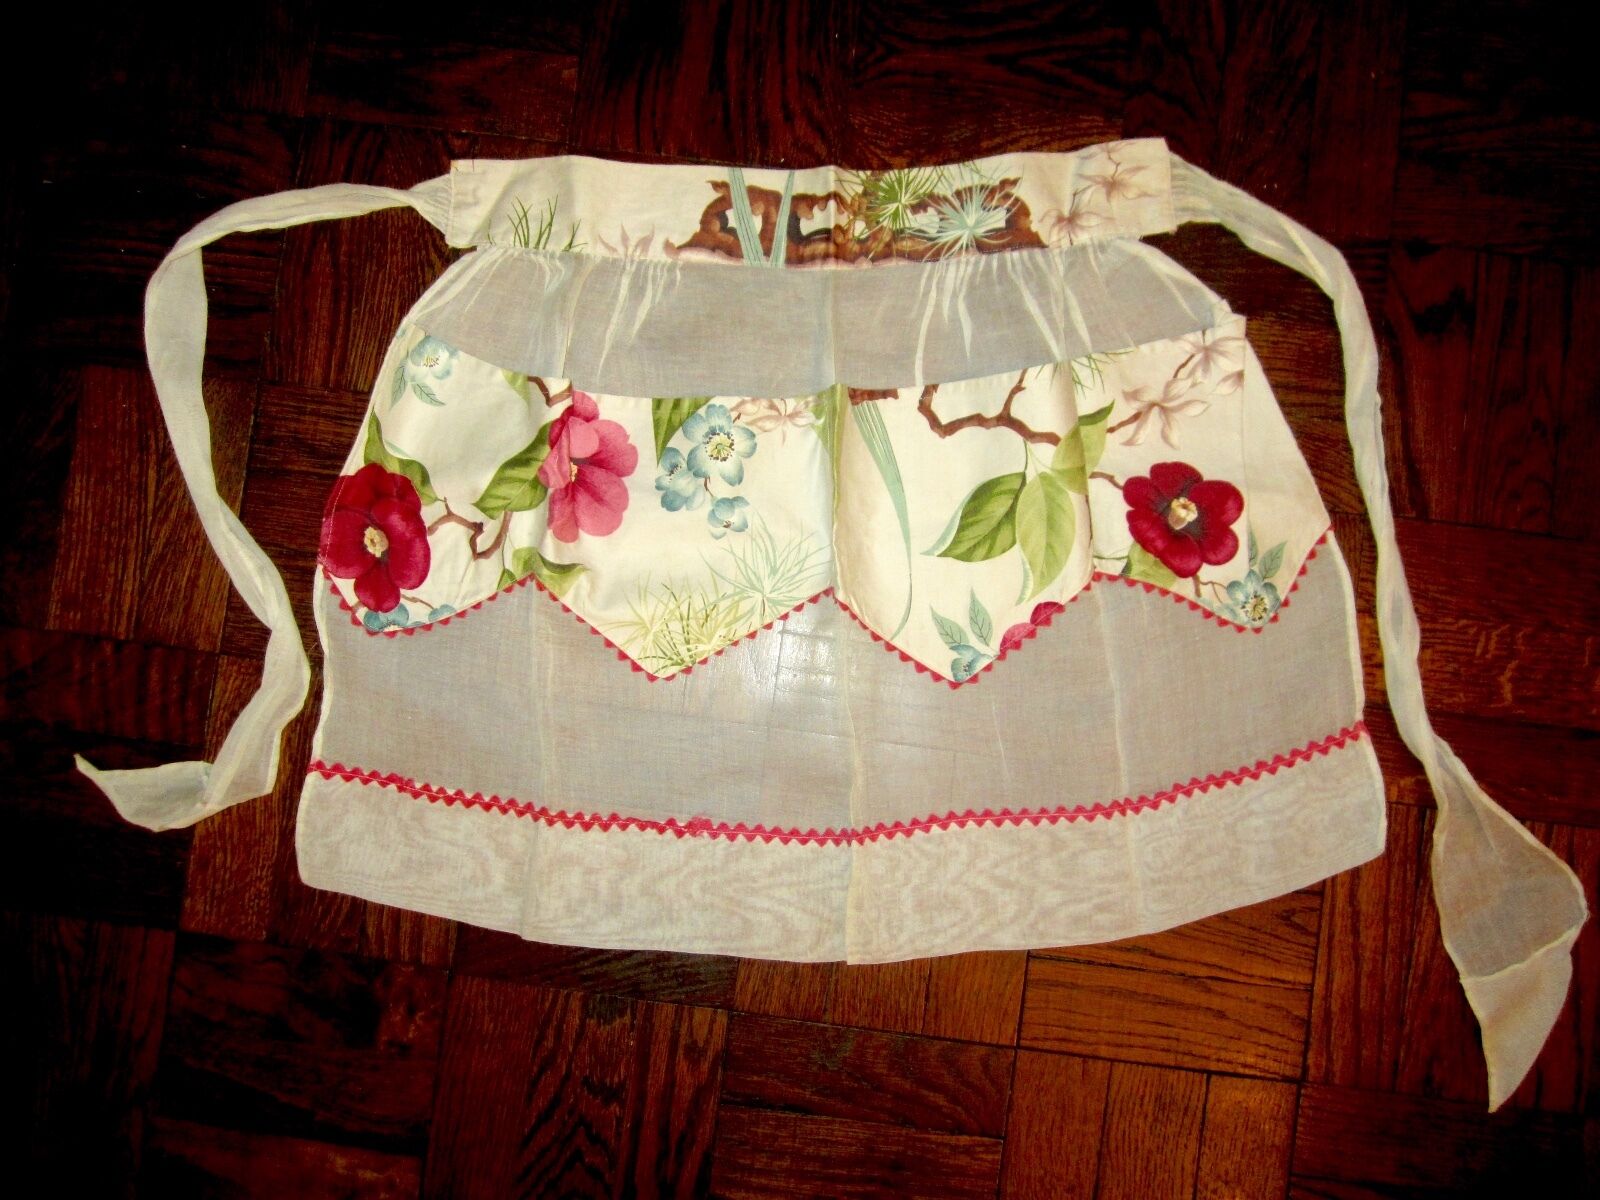 Vintage Floral Half Apron with Pockets Ric Rac Midcentury Style Superb Minty